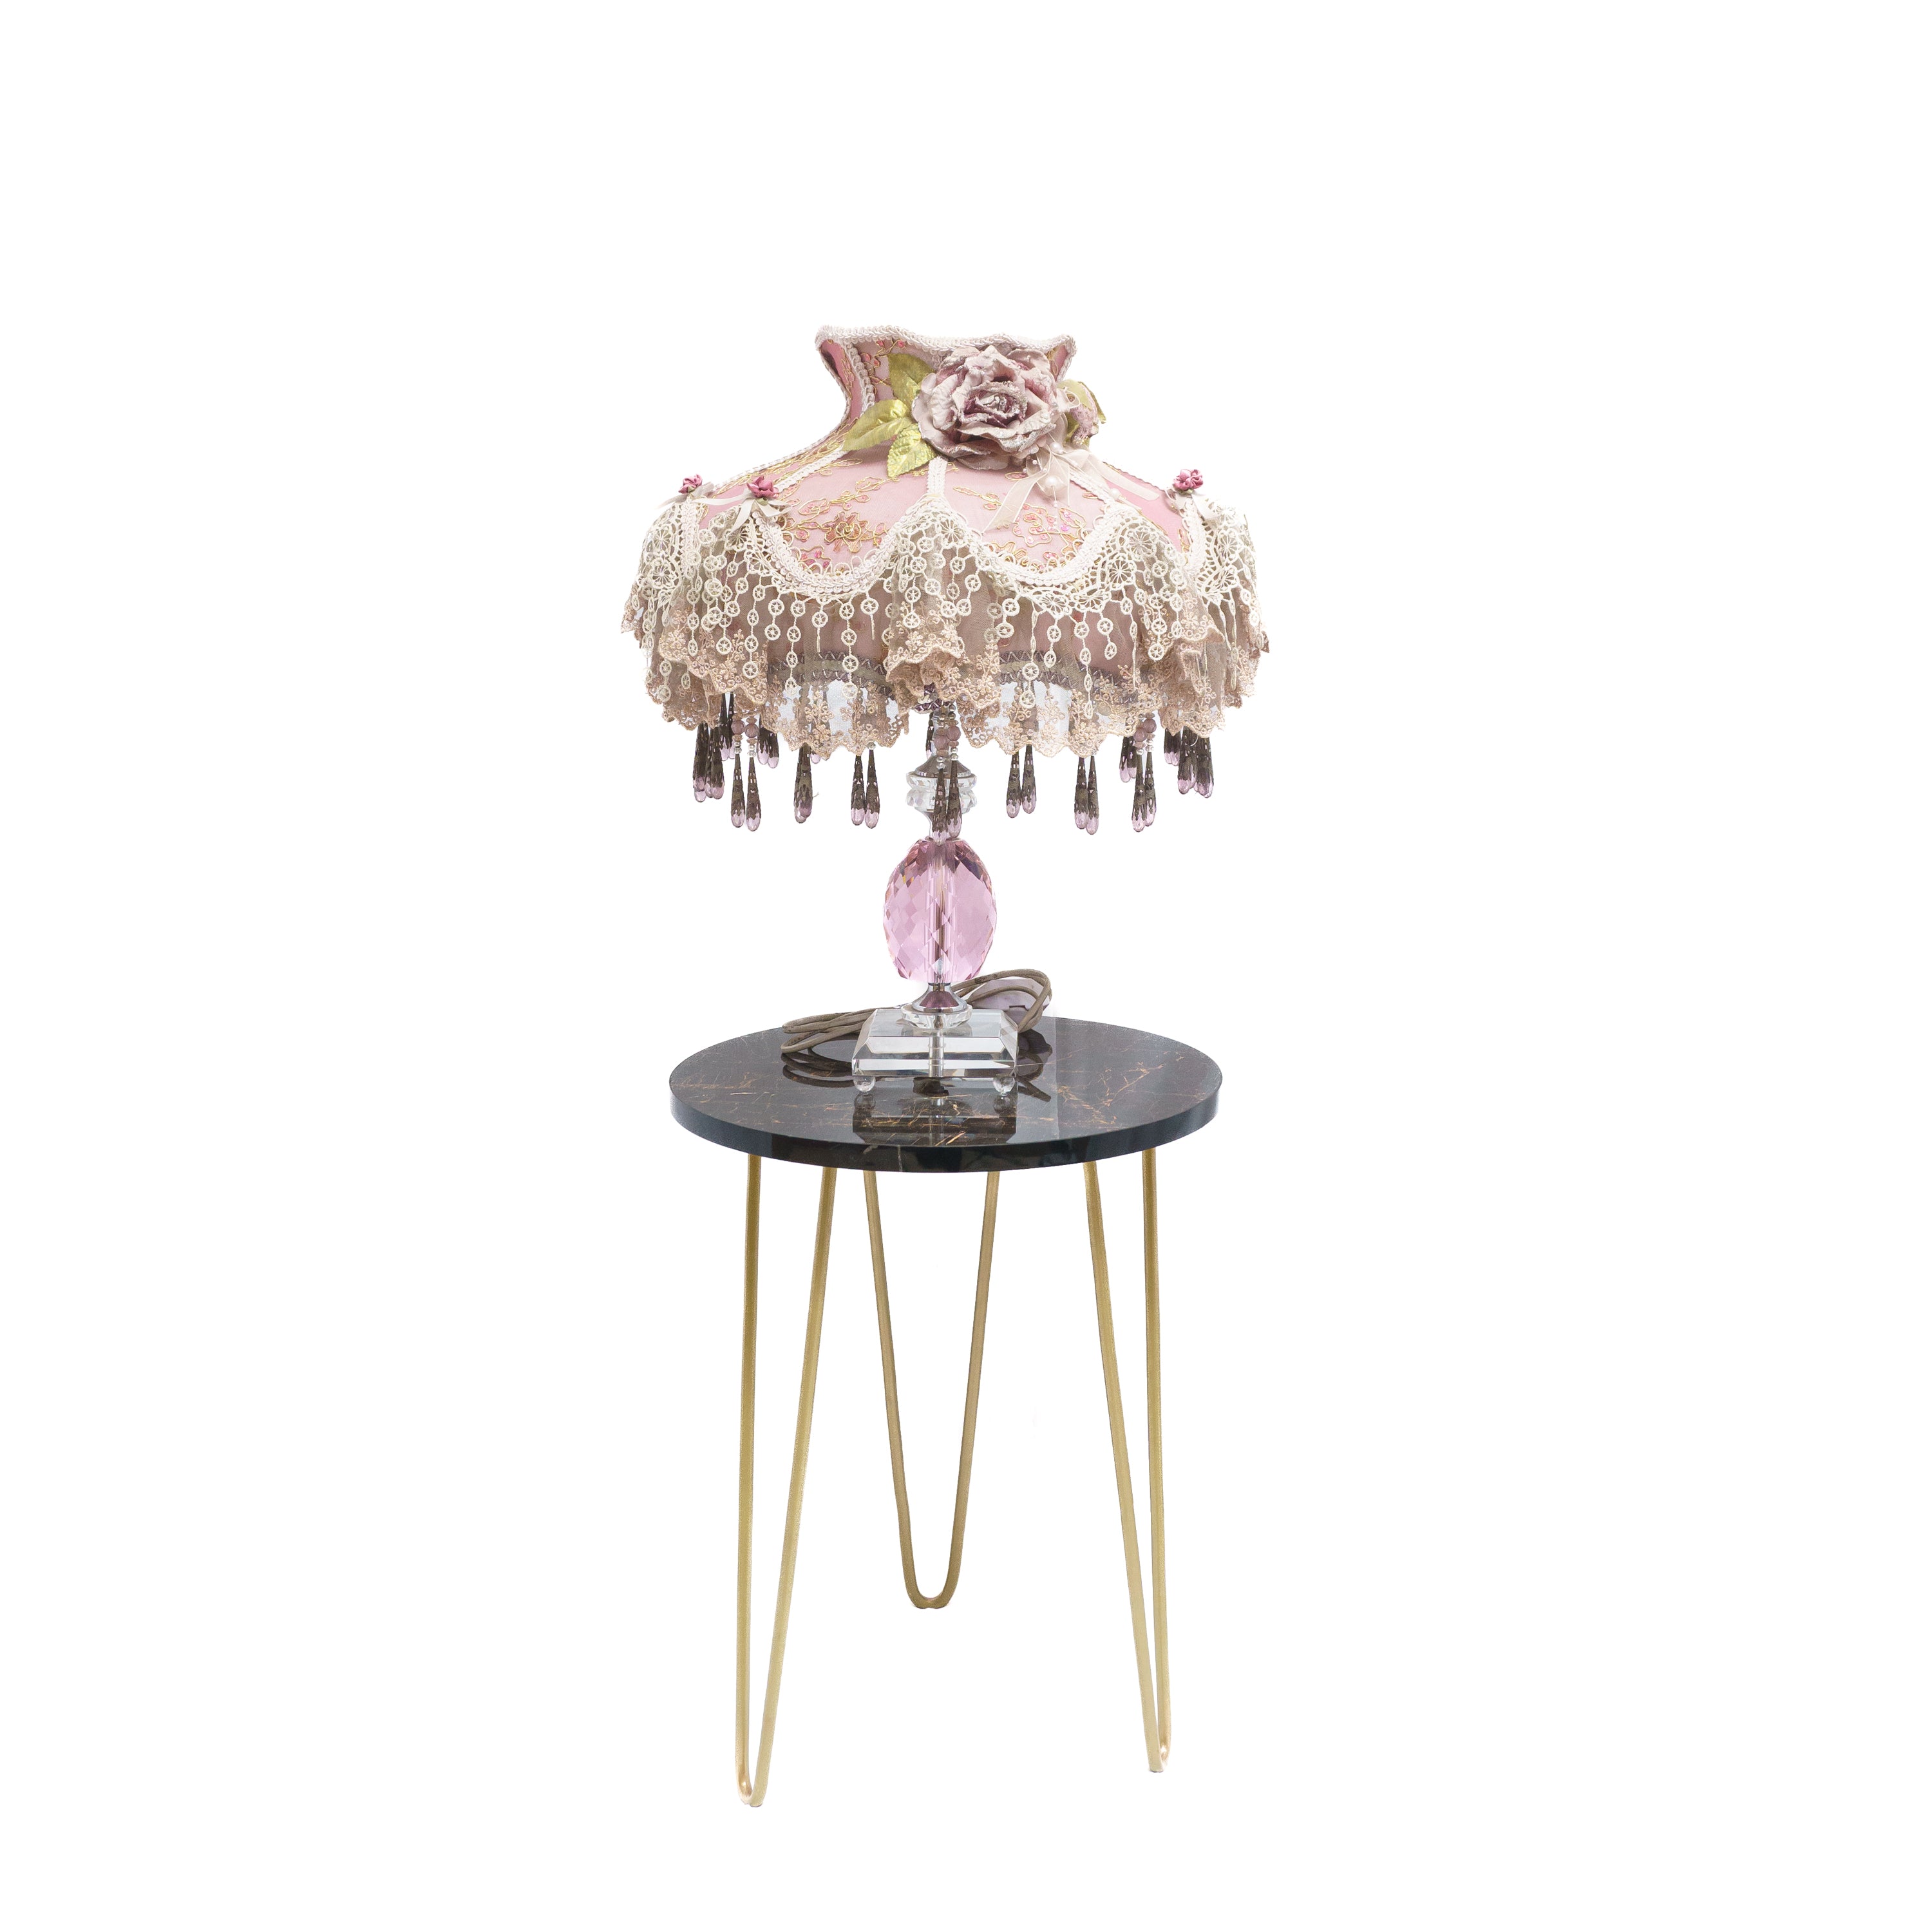 Rose Flower Umbrella Style Table Lamp with Net, Beads, Crystal Ball Stand, and Square Crystal Base